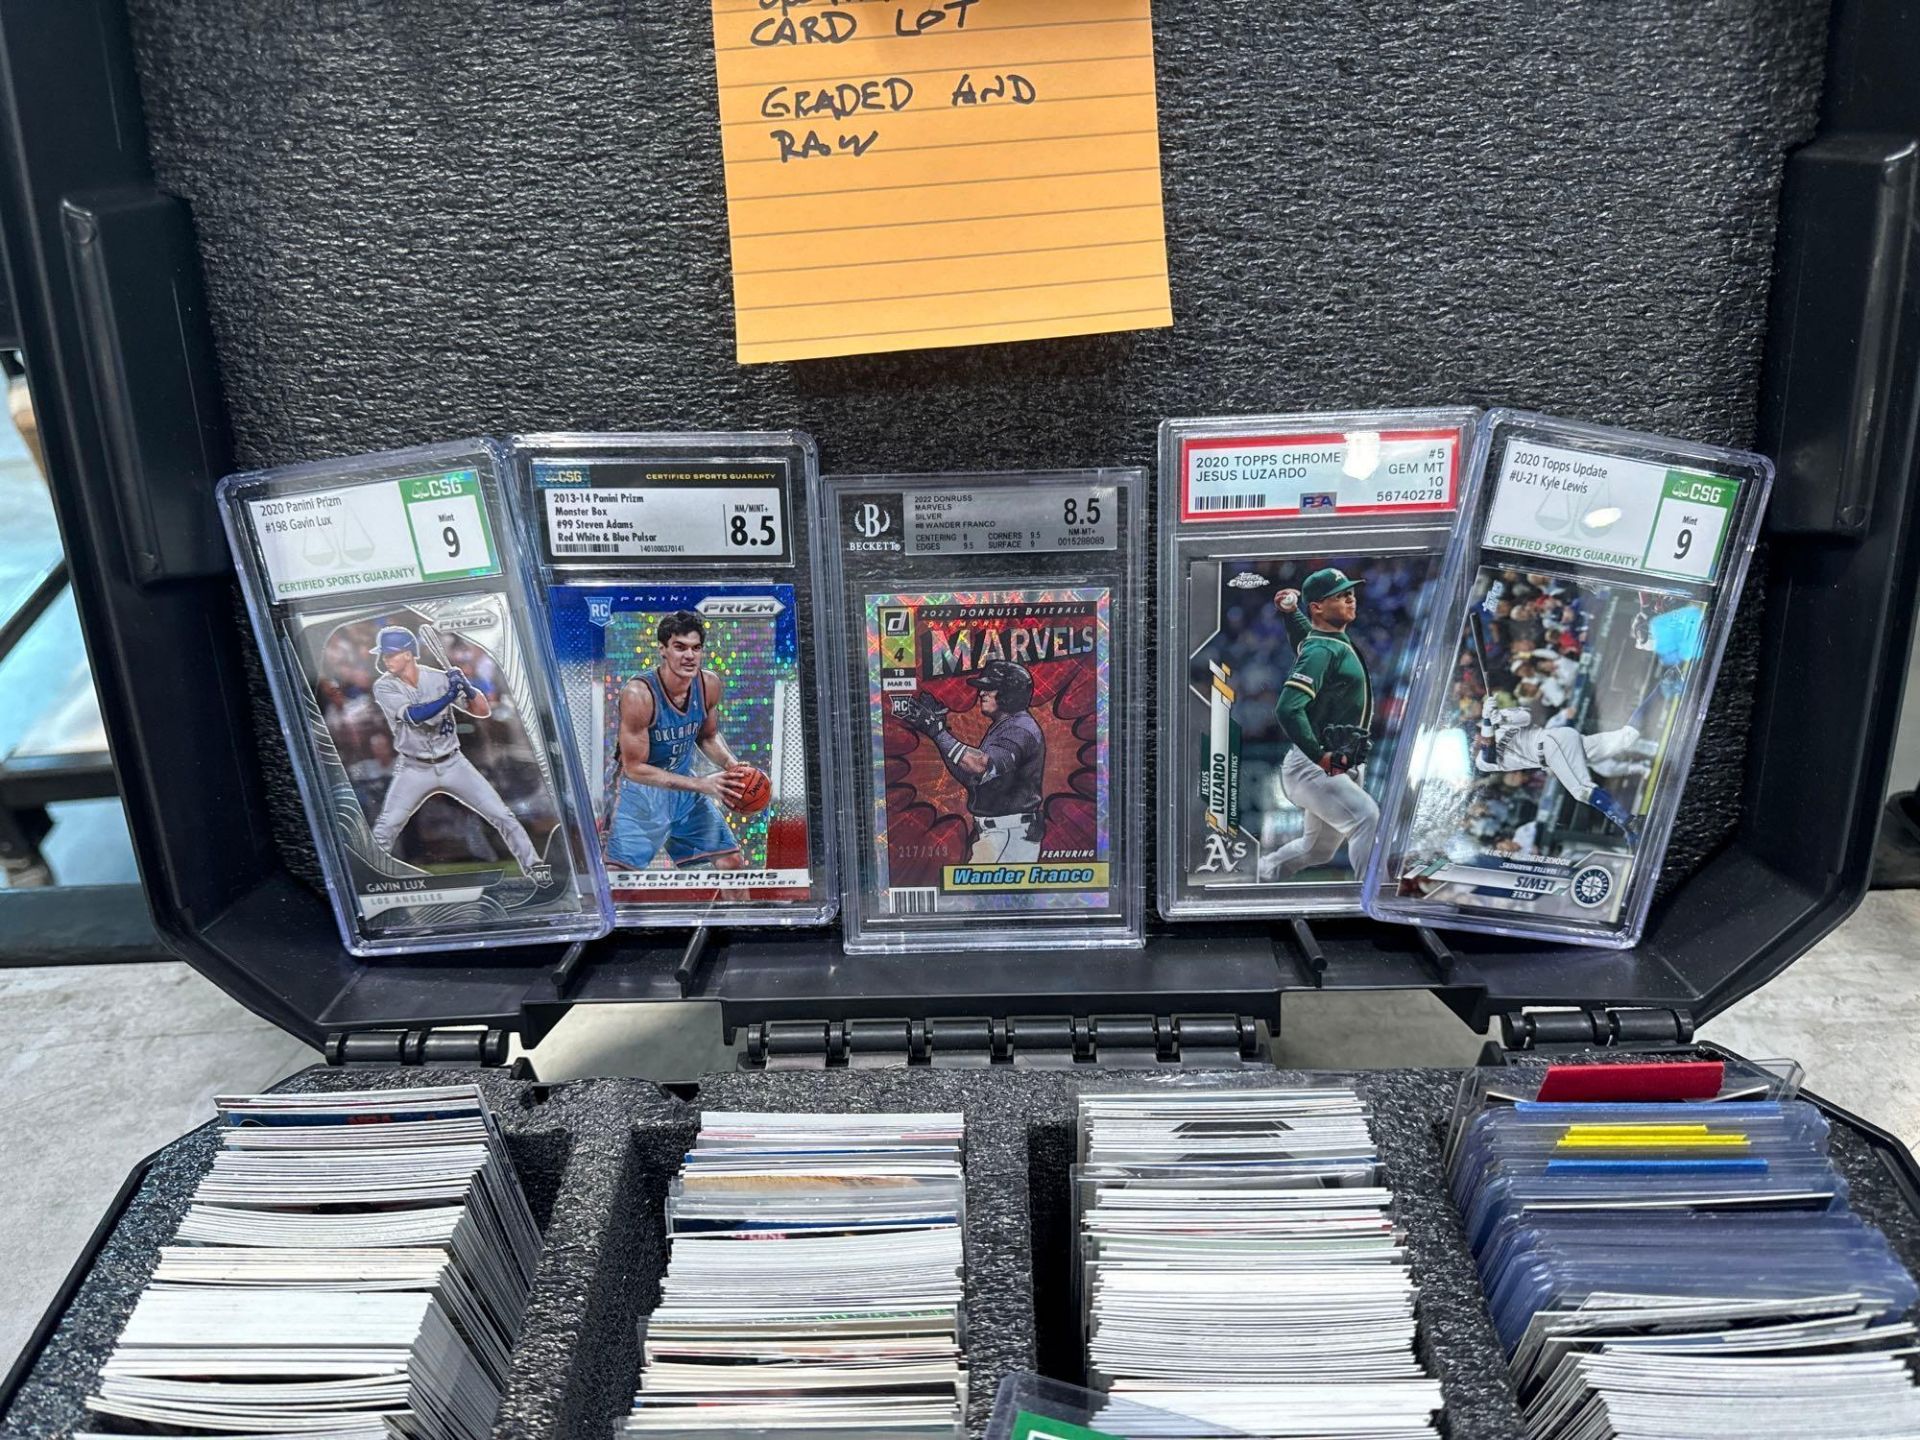 Sports Card Lot Graded and raw - Image 3 of 5